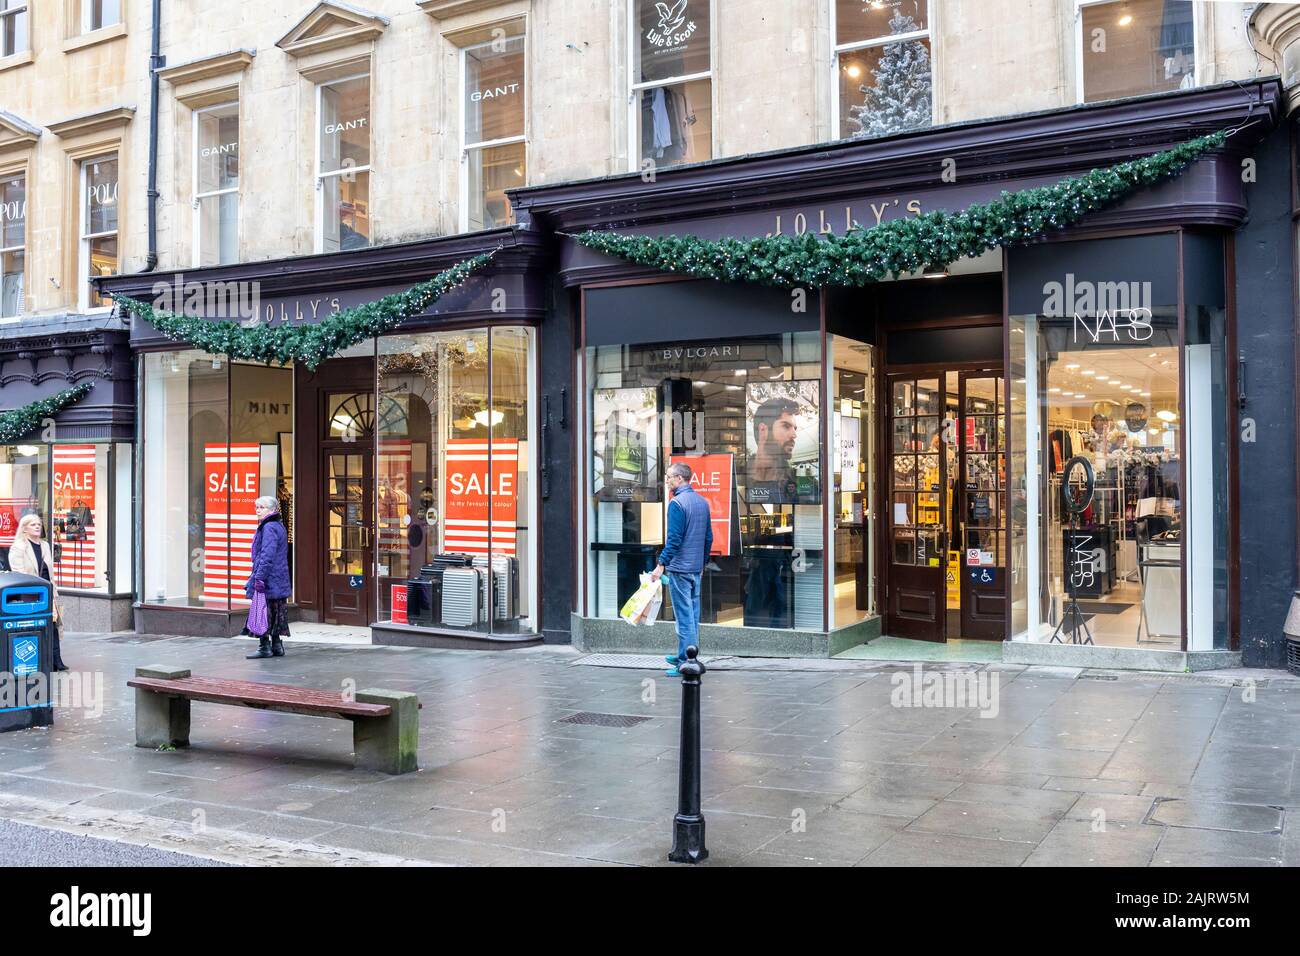 Oldest Department Store High Resolution Stock Photography and Images - Alamy